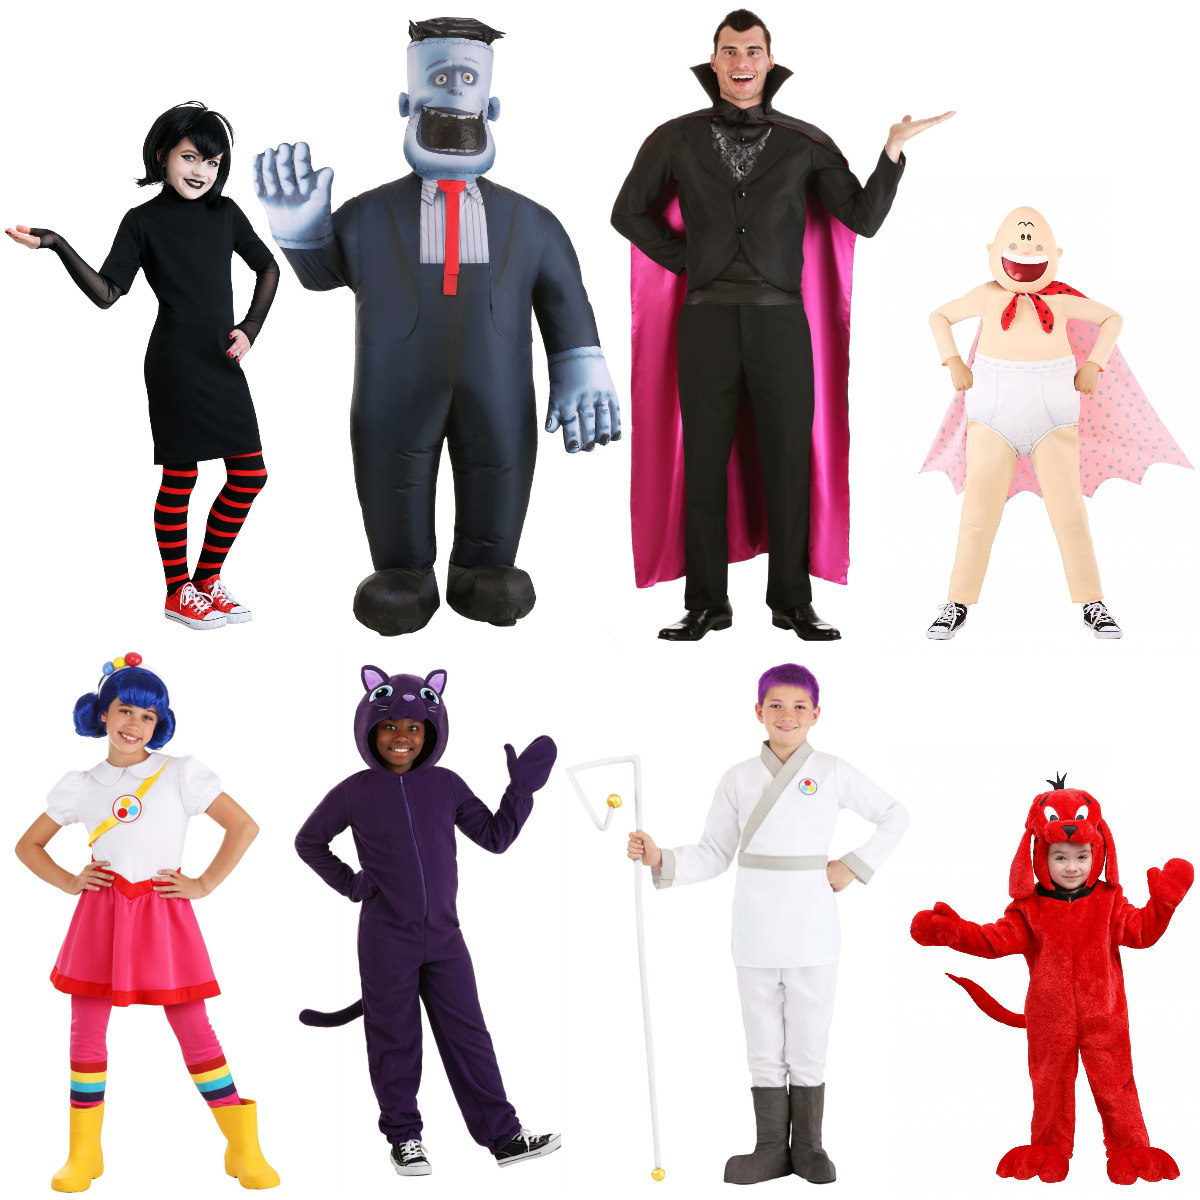 The Ultimate Cartoon Character Costumes for an Animated Saturday Morning  [Costume Guide]  Blog